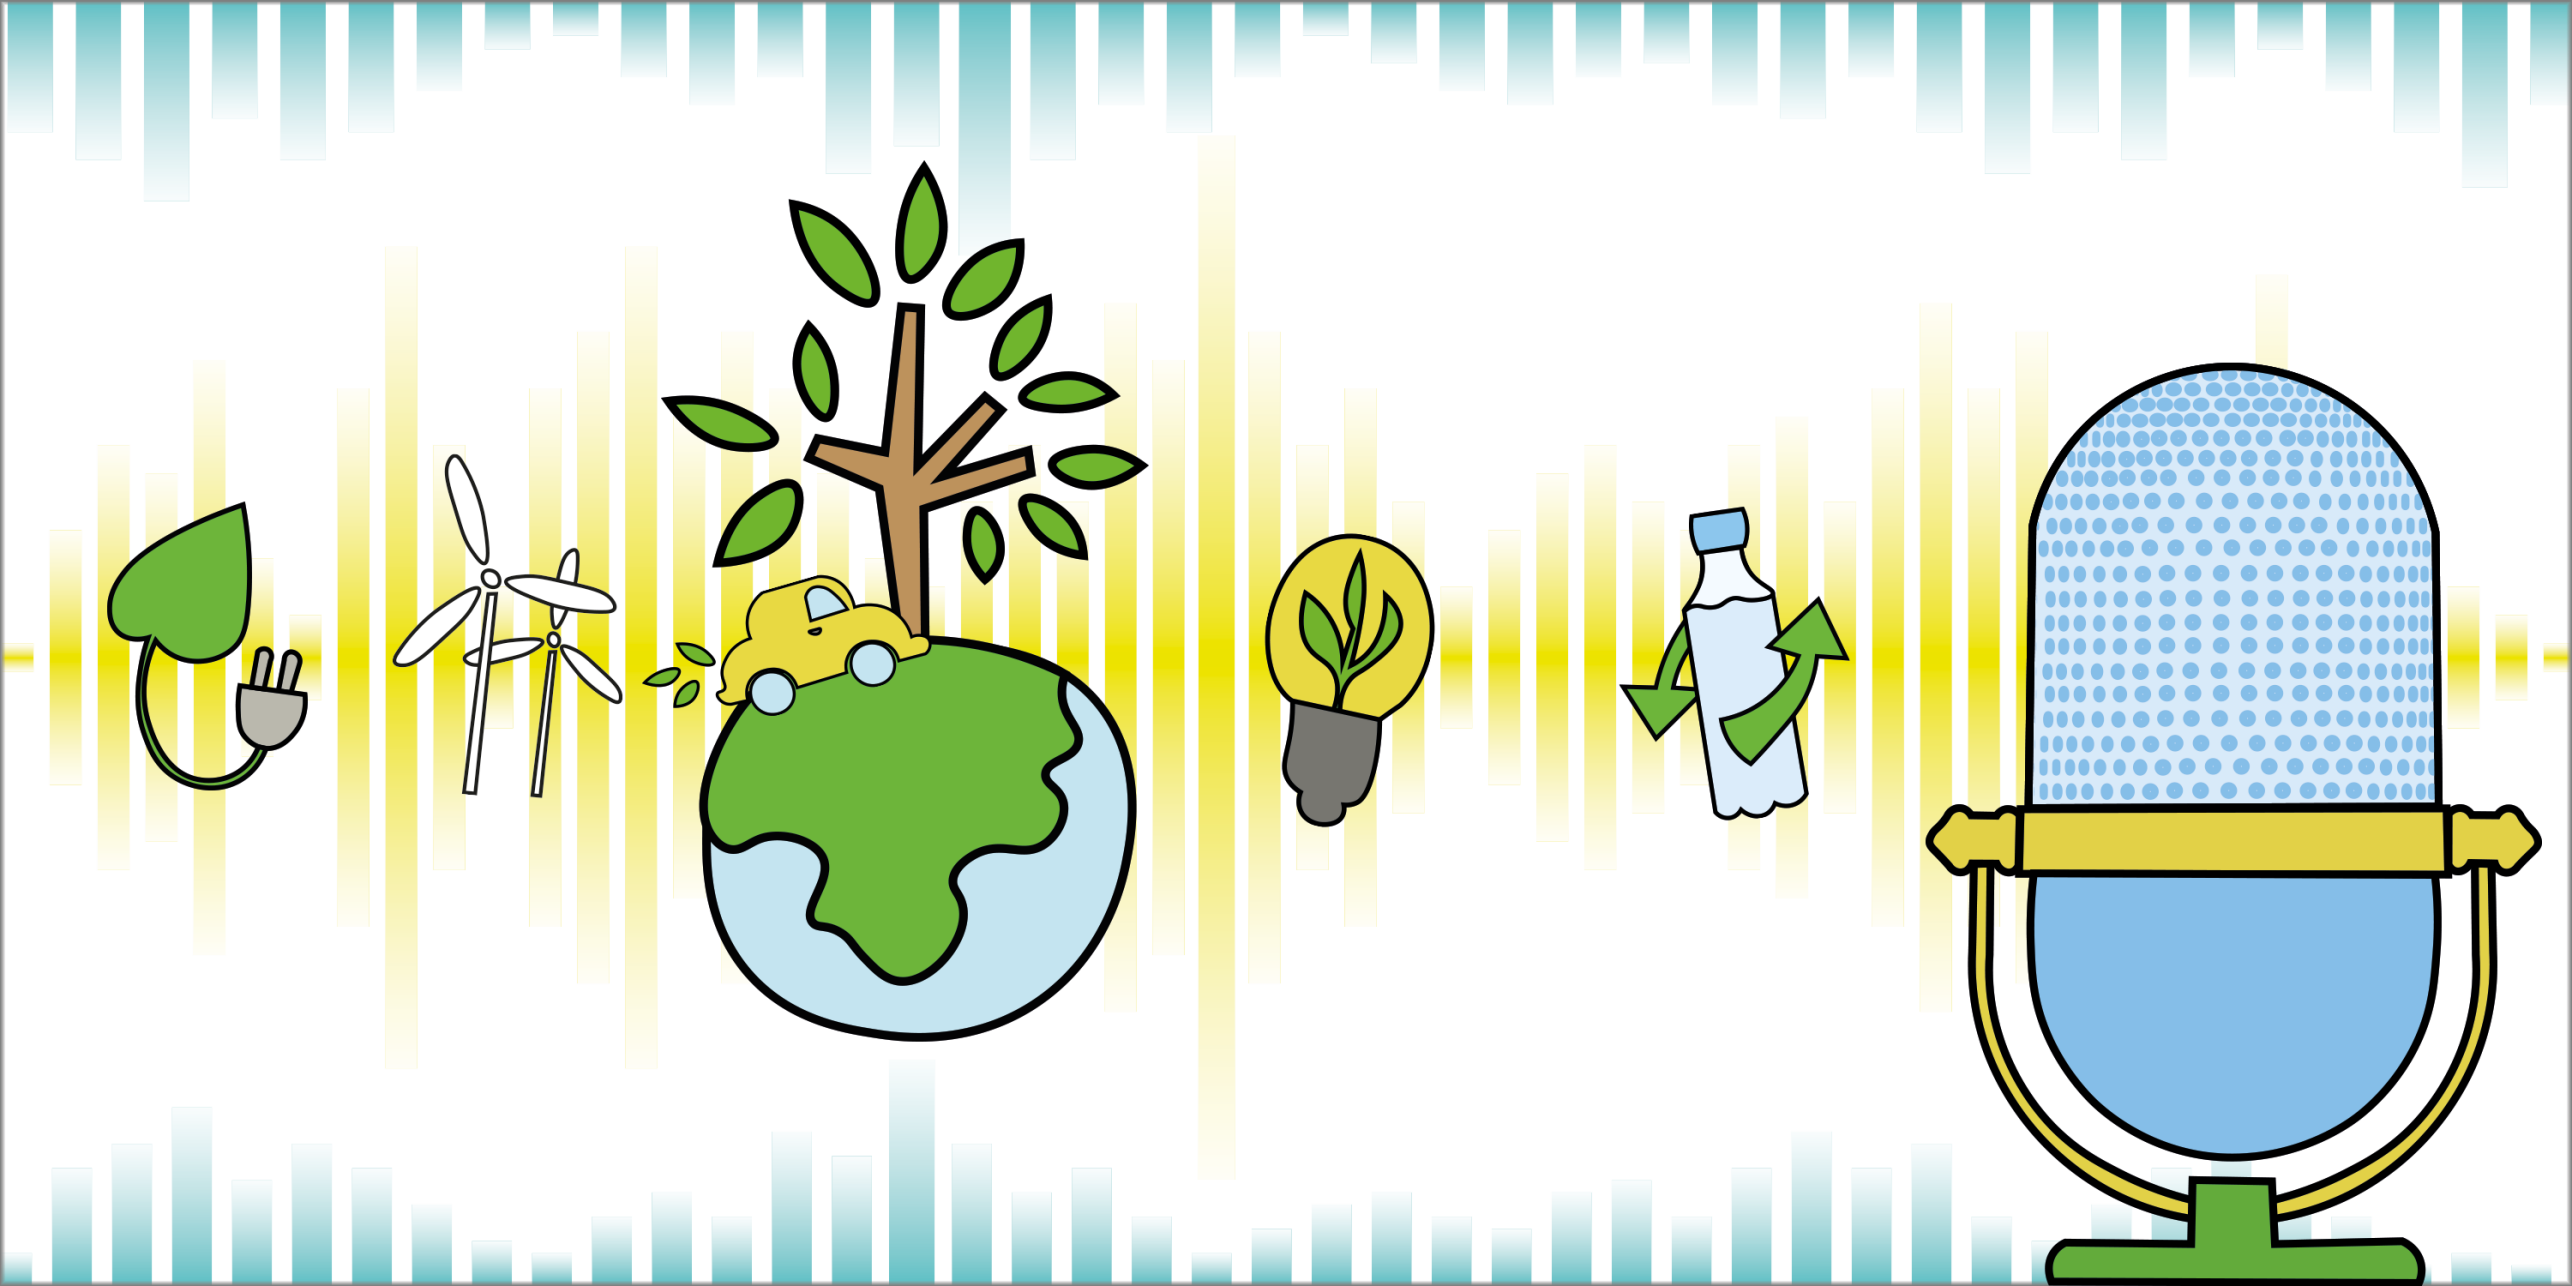 Pictogram of a series of objects: a power cable, wind turbines, the globe with a car, a light bulb, a bottle and a microphone